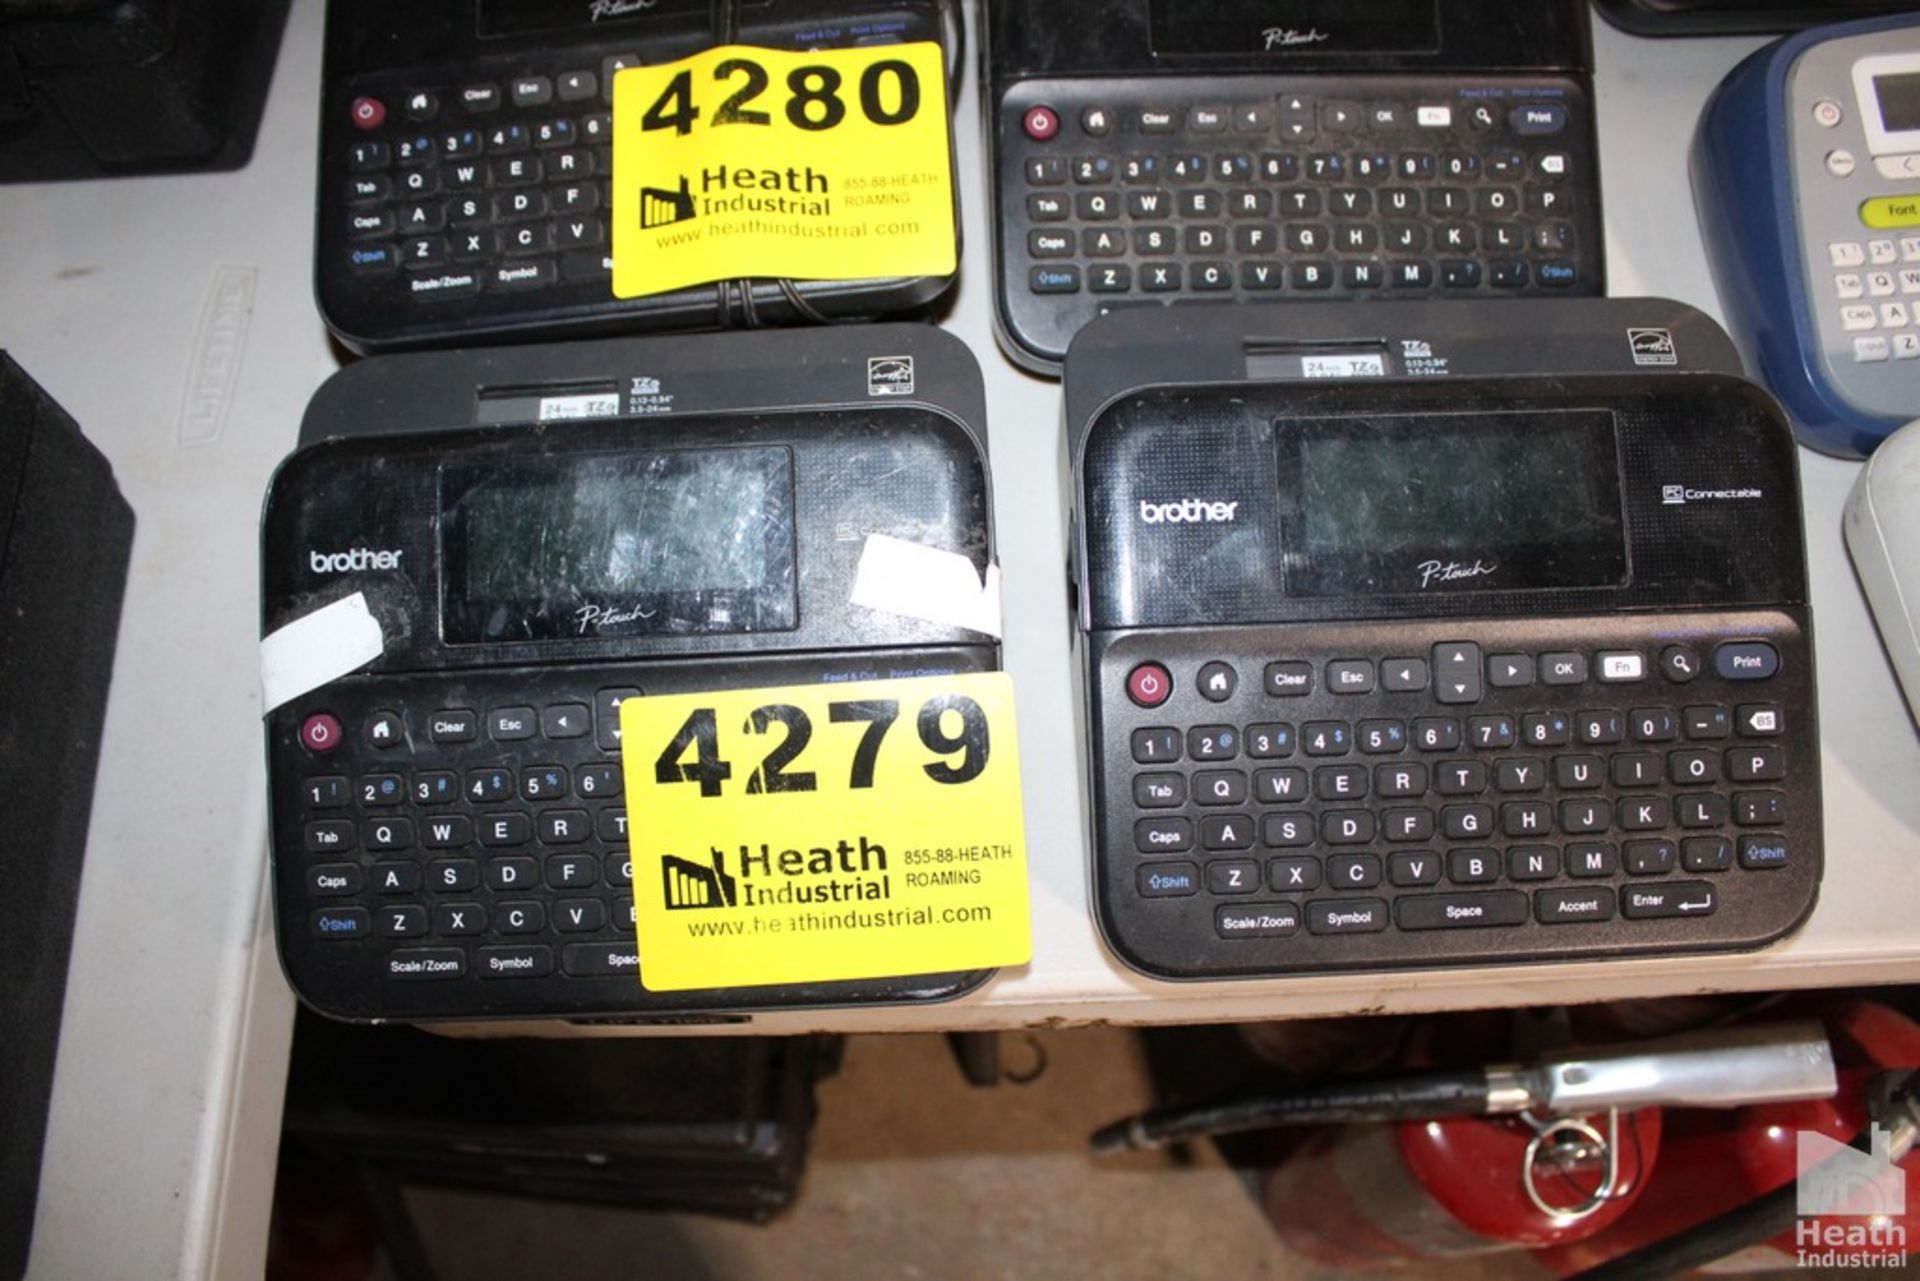 (2) BROTHER P-TOUCH LABEL MAKERS